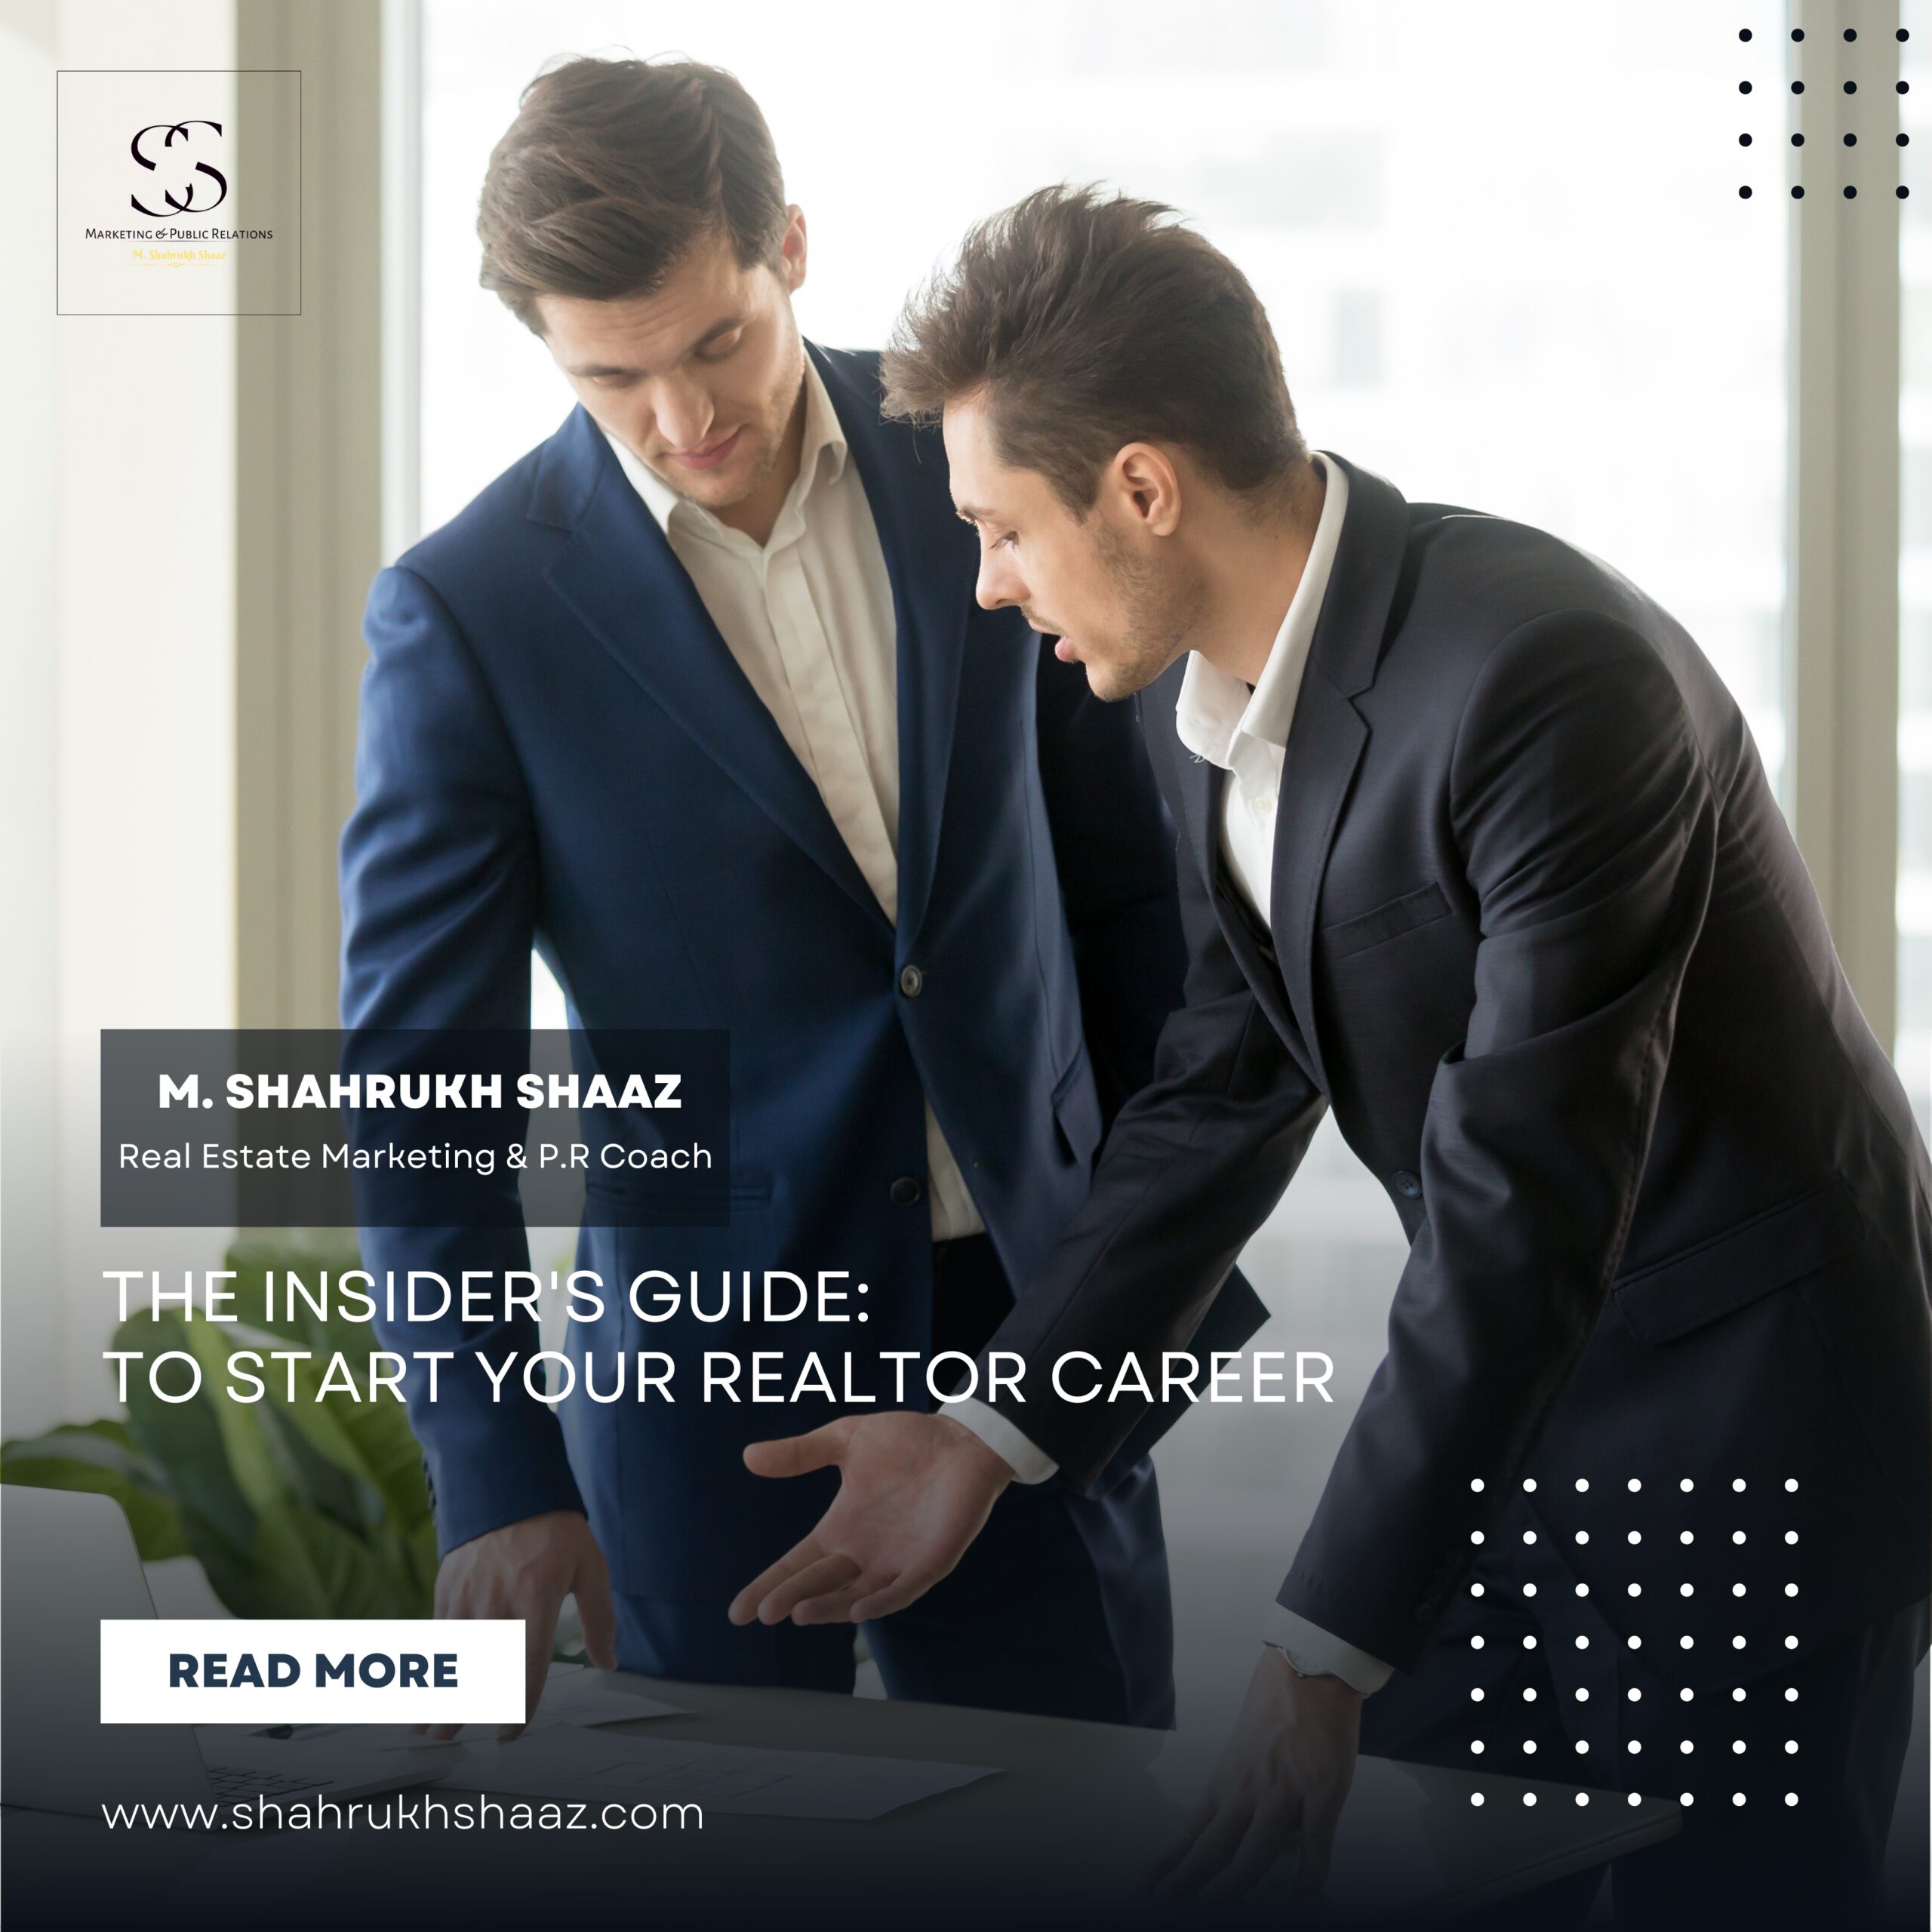 The Insider's Guide: to Start Your Realtor Career